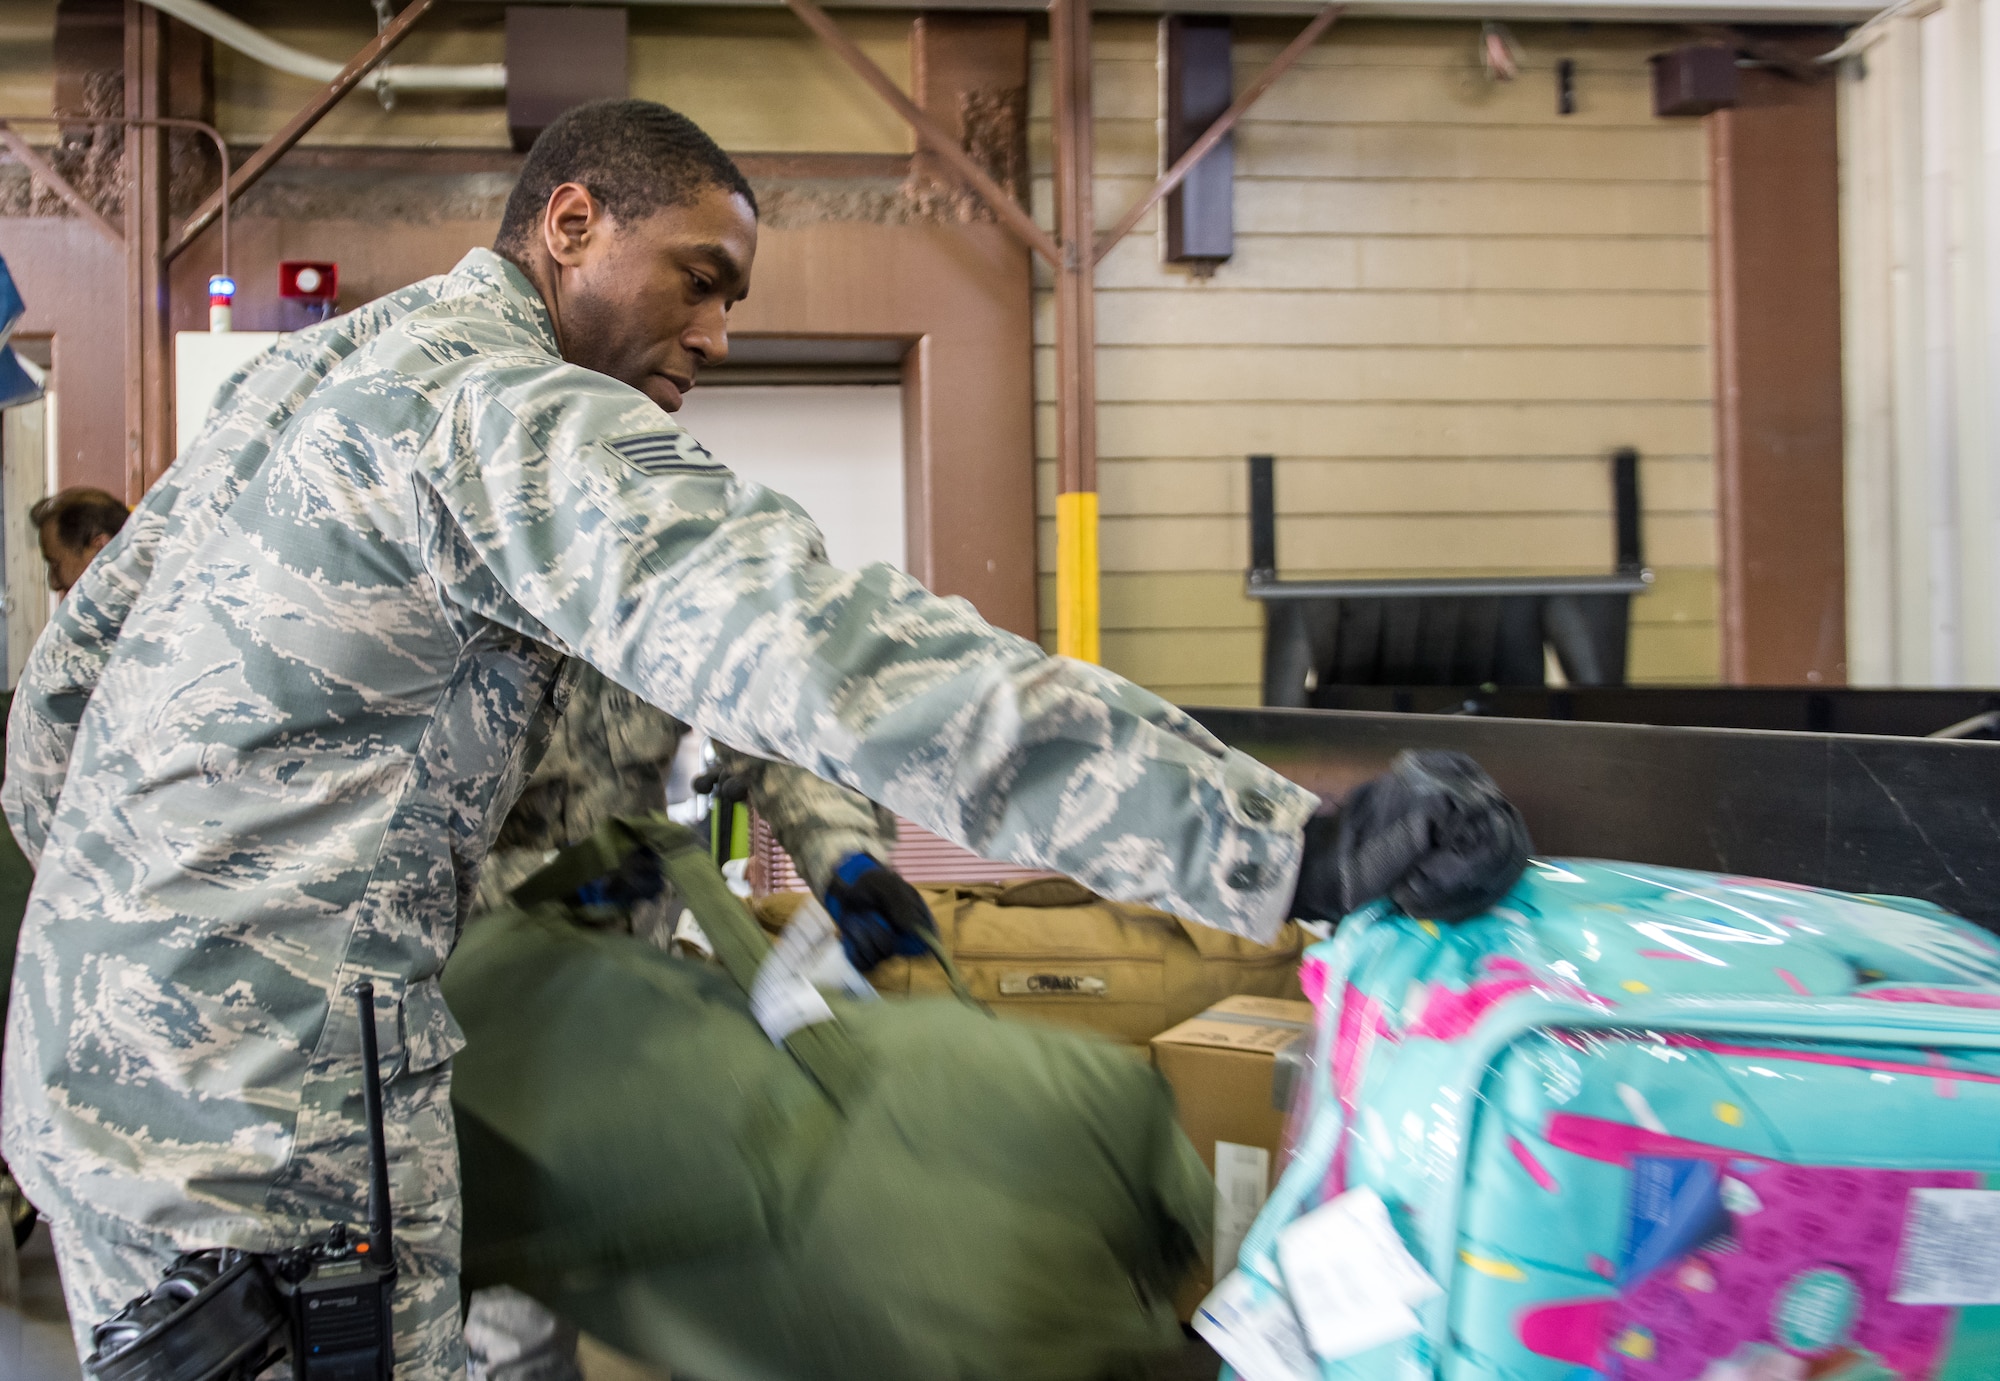 U.S. Air Force Staff Sgt. Troy McCray, 730th Air Mobility Squadron passenger service supervisor, puts luggage on to a baggage carousel